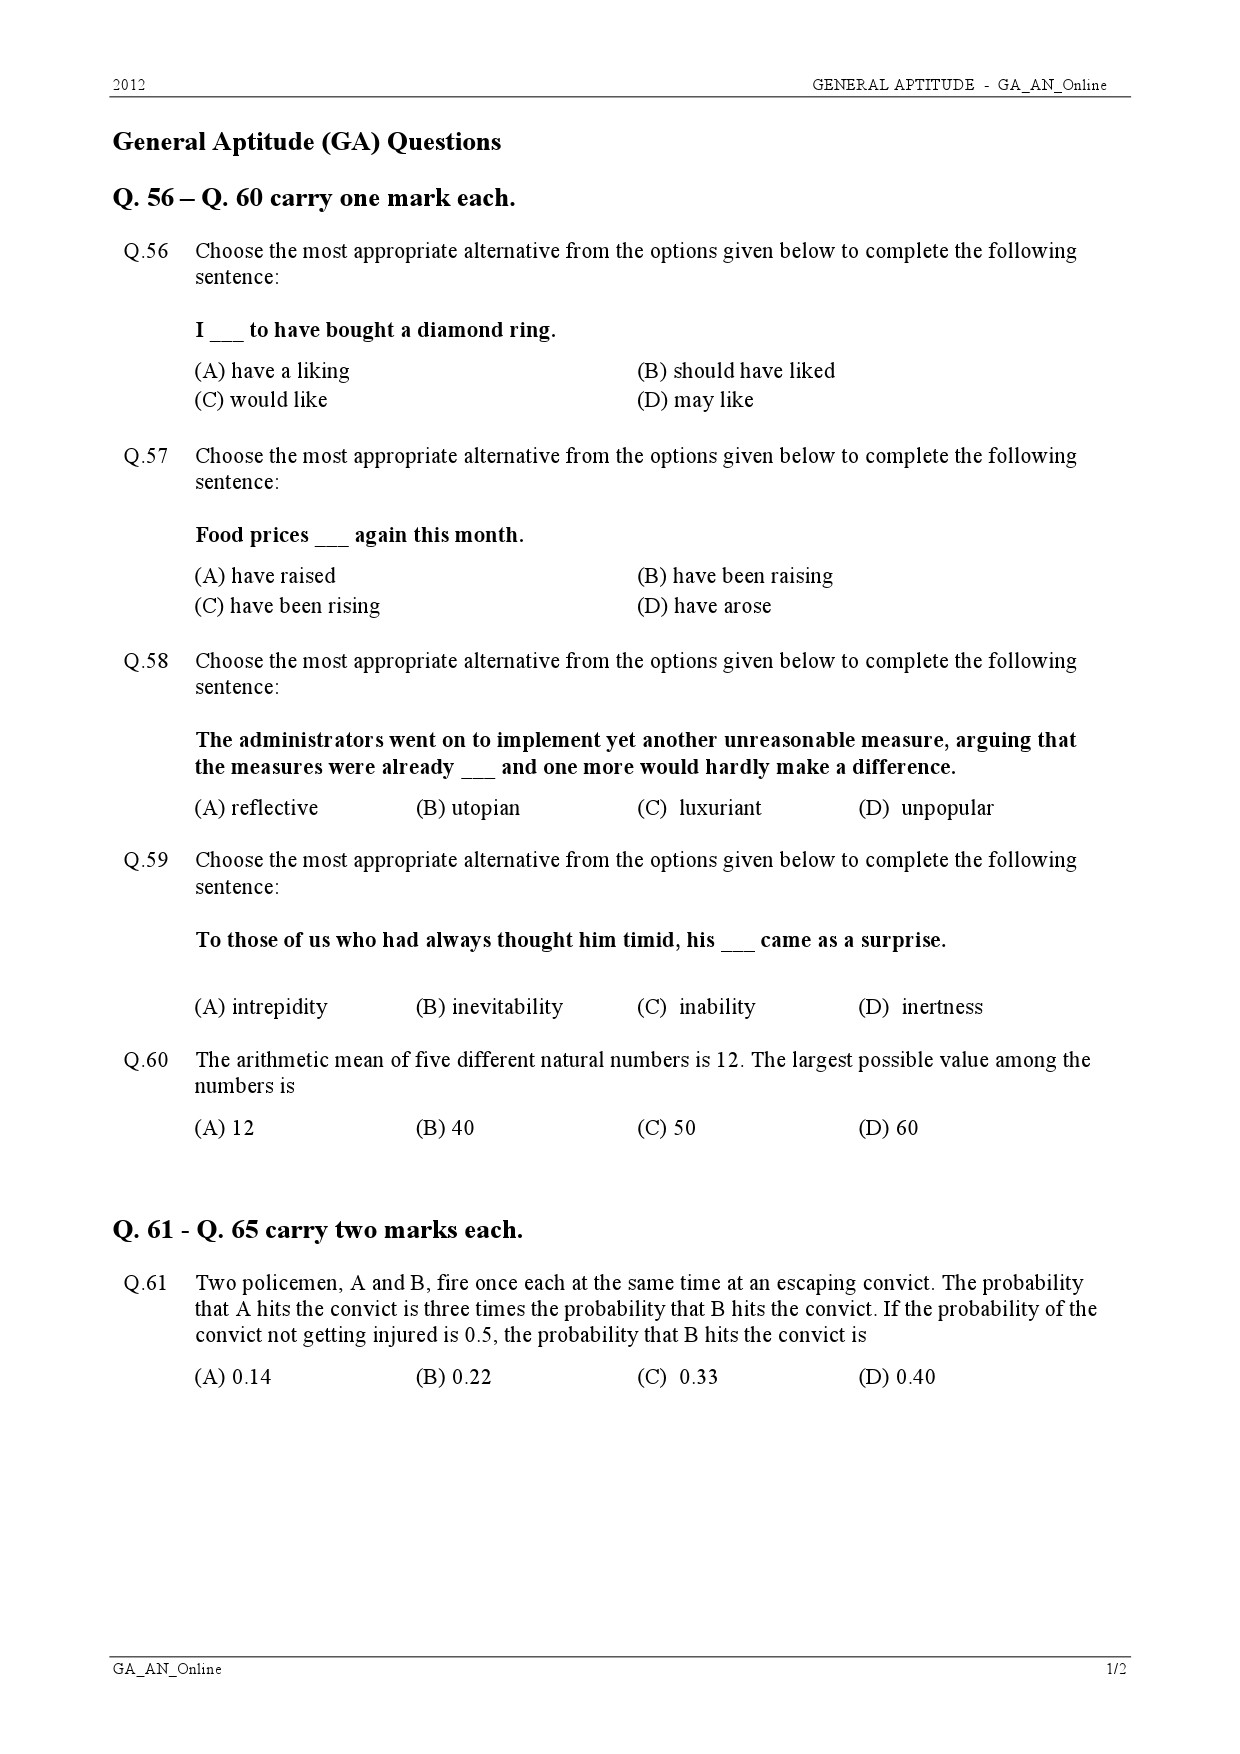 GATE Exam Question Paper 2012 Mining Engineering 11